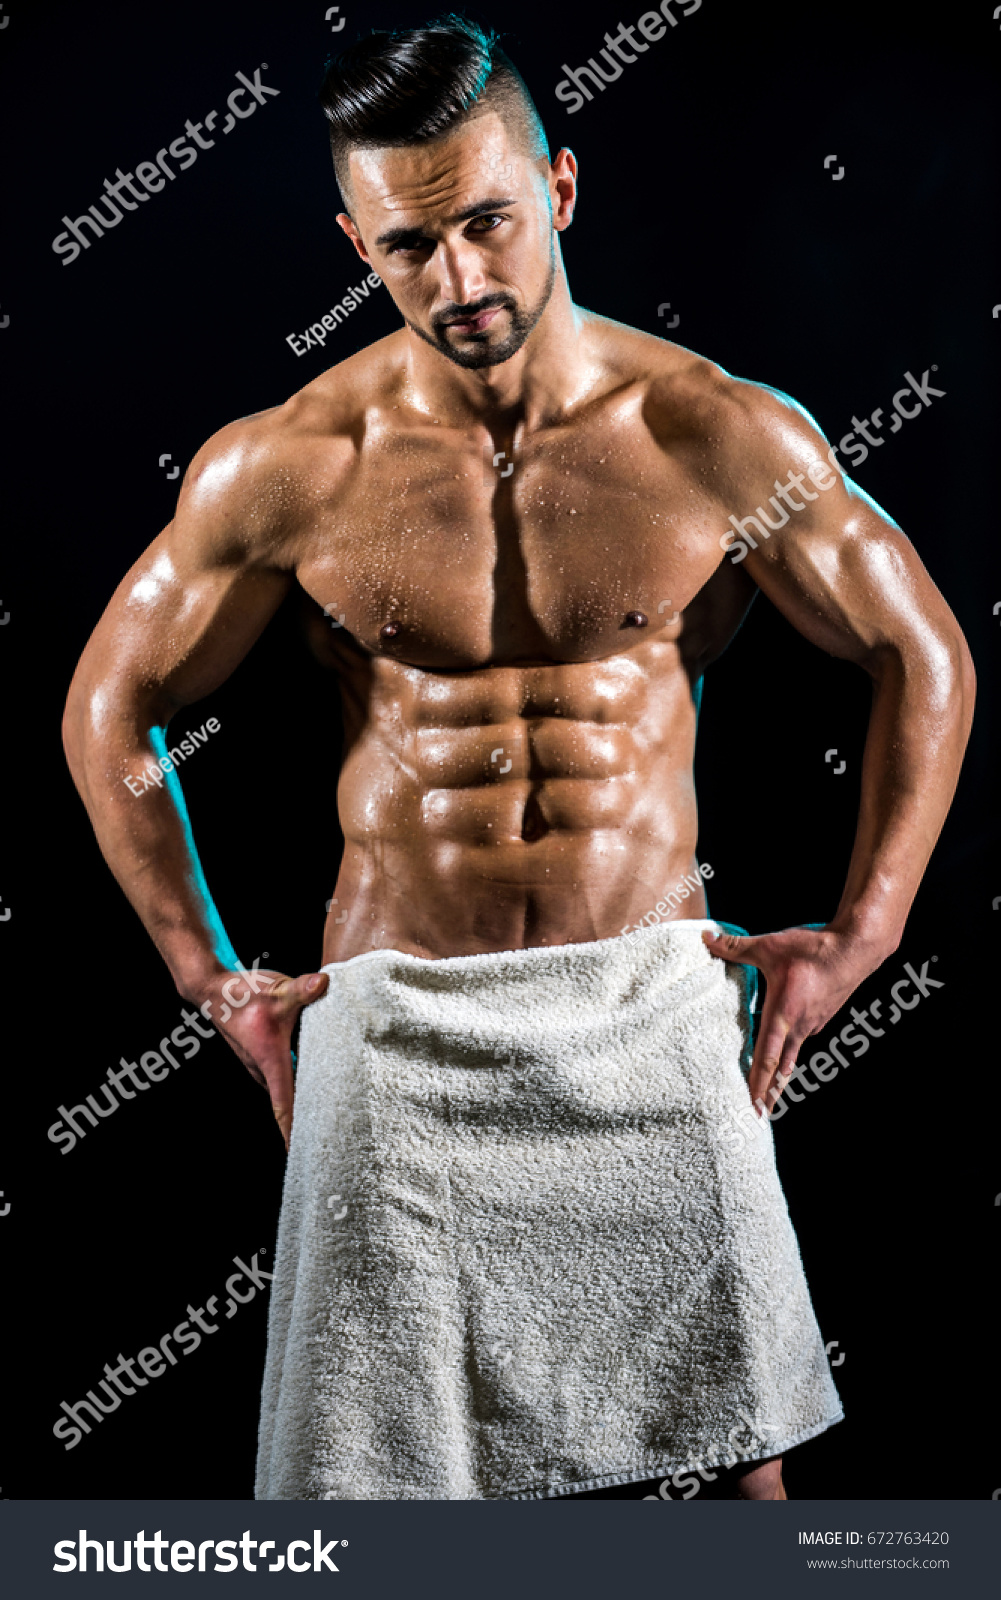 Penis towel exercise